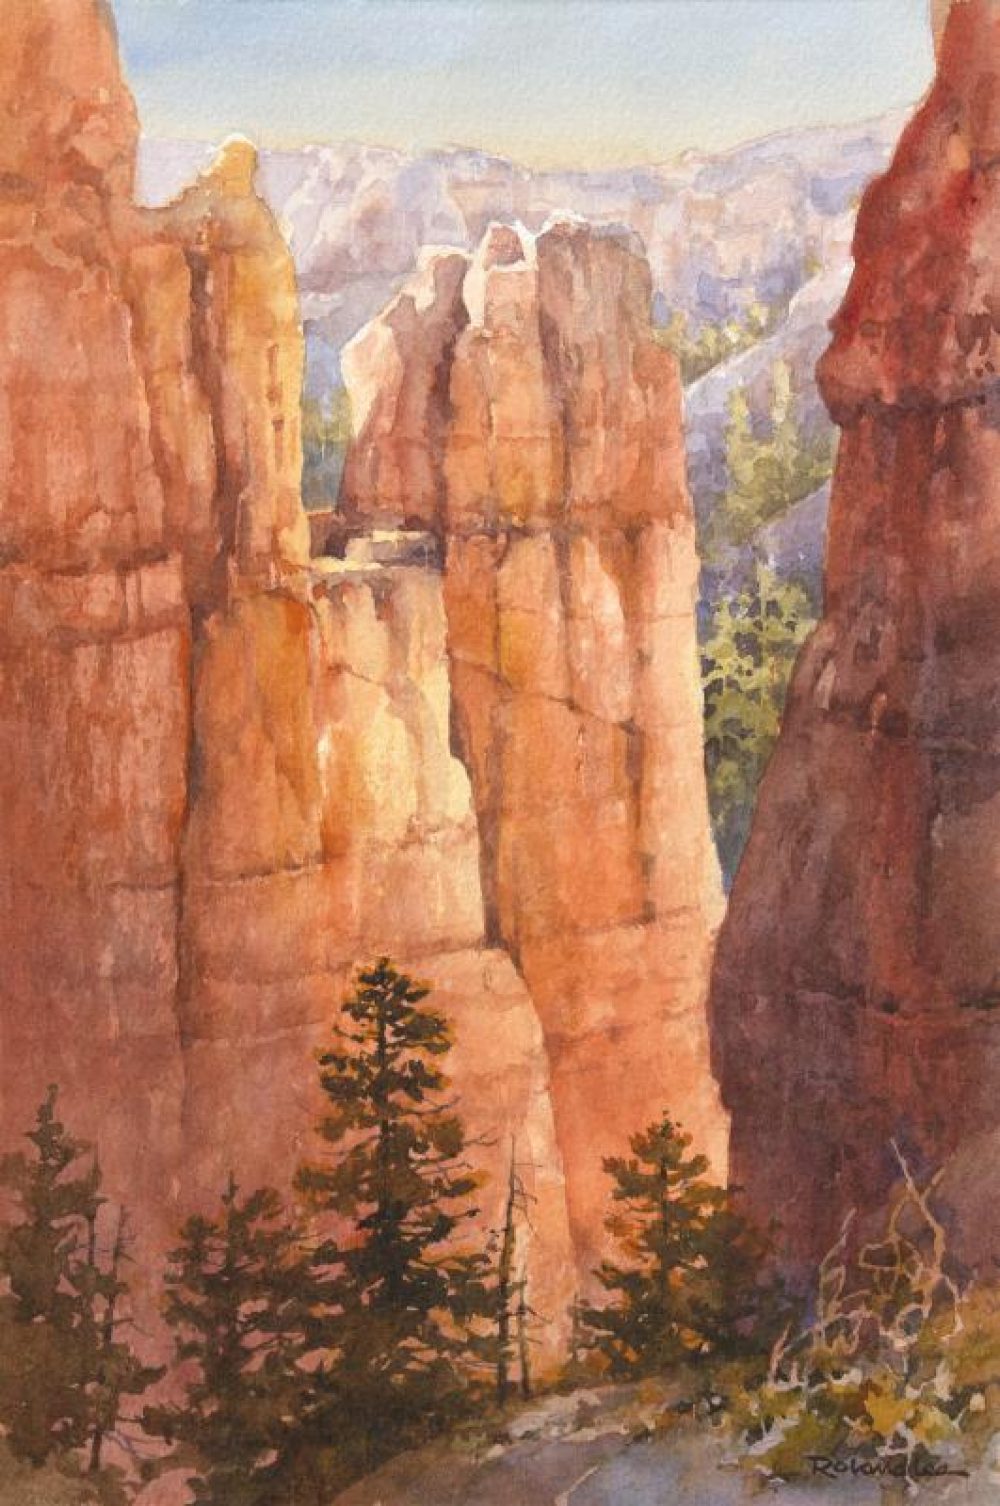 Below the Rim - Bryce Canyon - Watercolor Painting of Bryce Canyon National Park